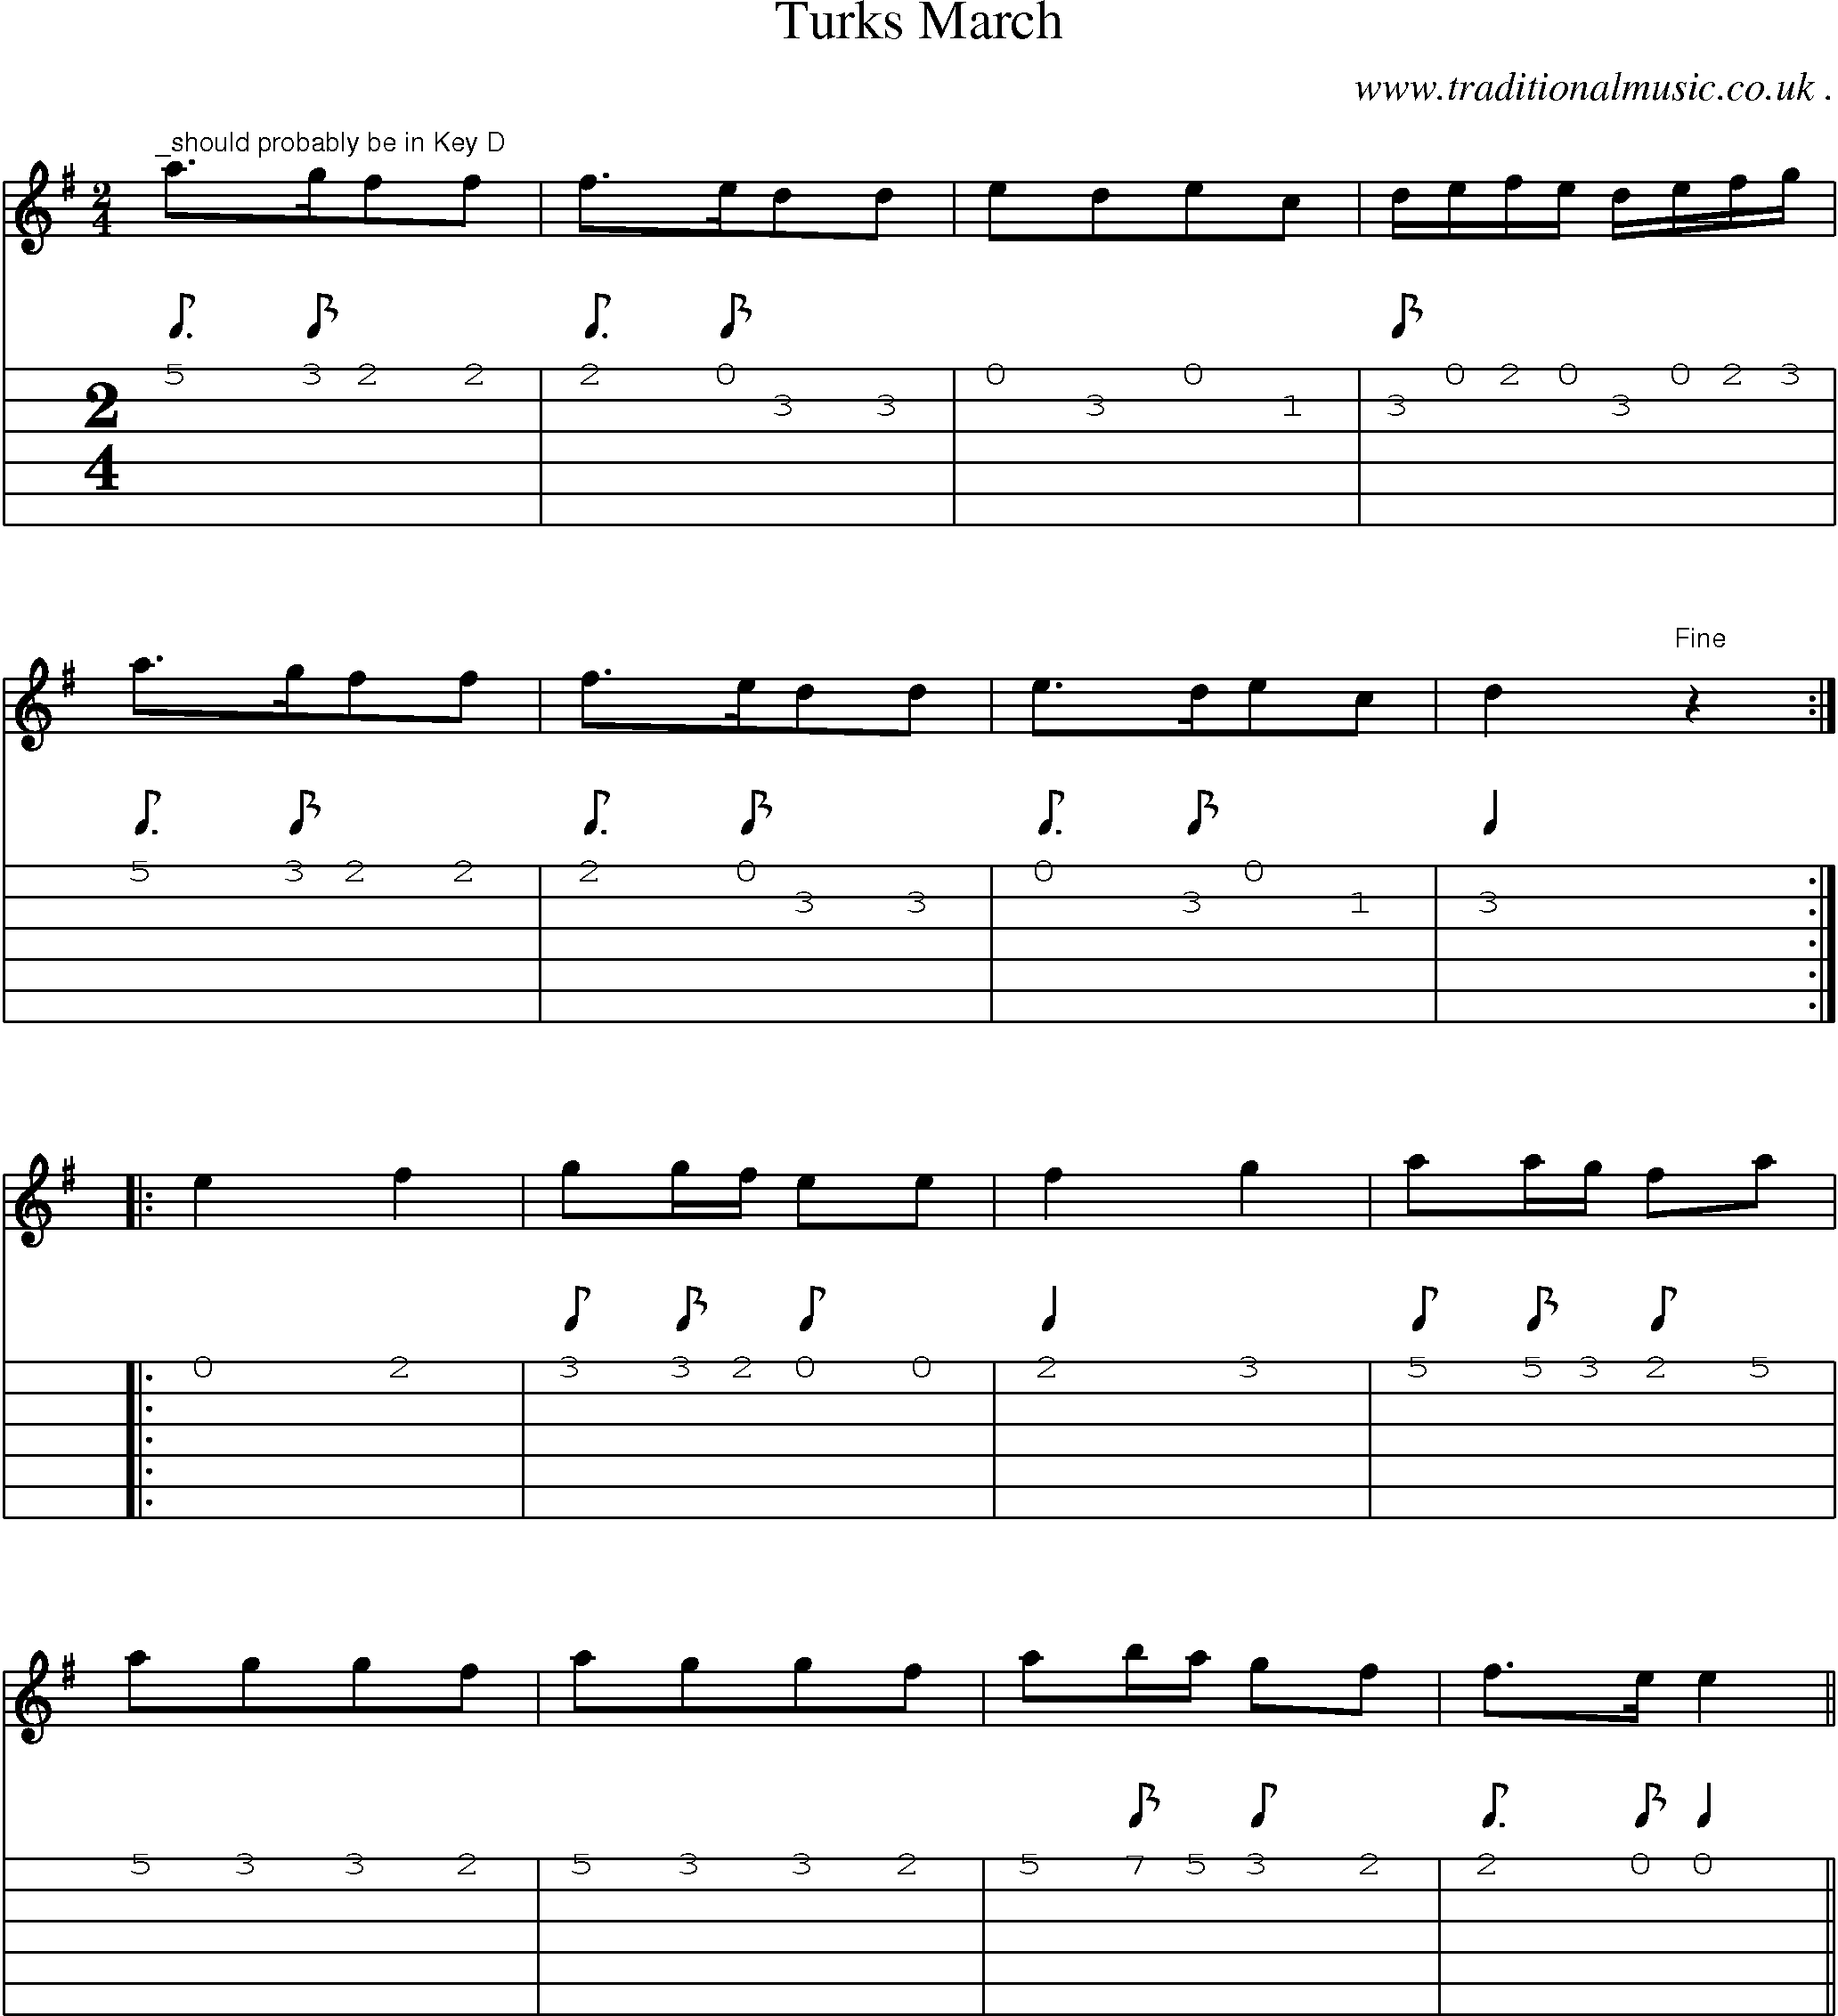 Sheet-Music and Guitar Tabs for Turks March